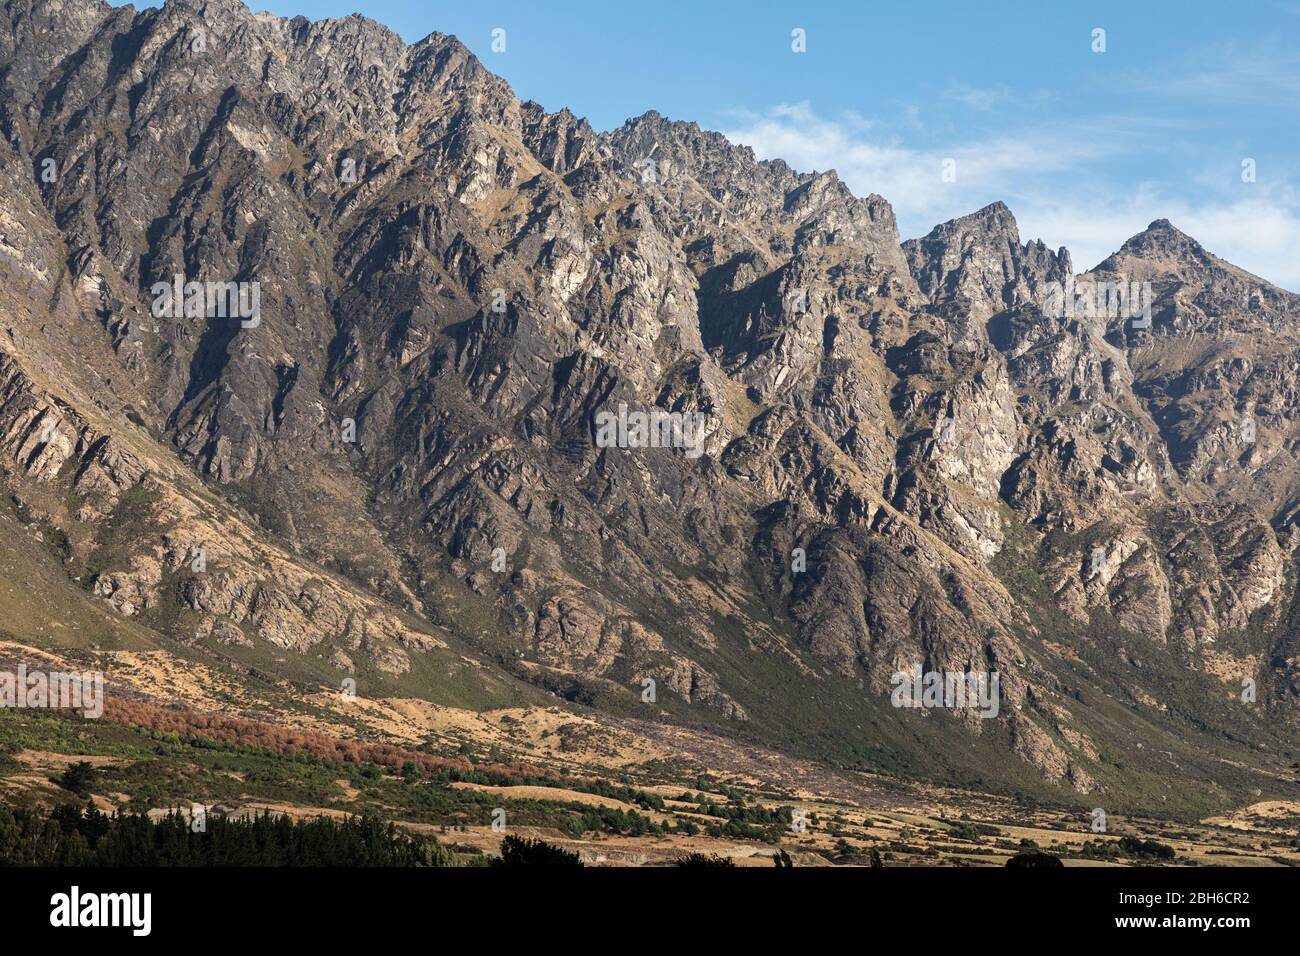 The Remarkables mountain range near Queenstown, South Island, New Zealand Stock Photo